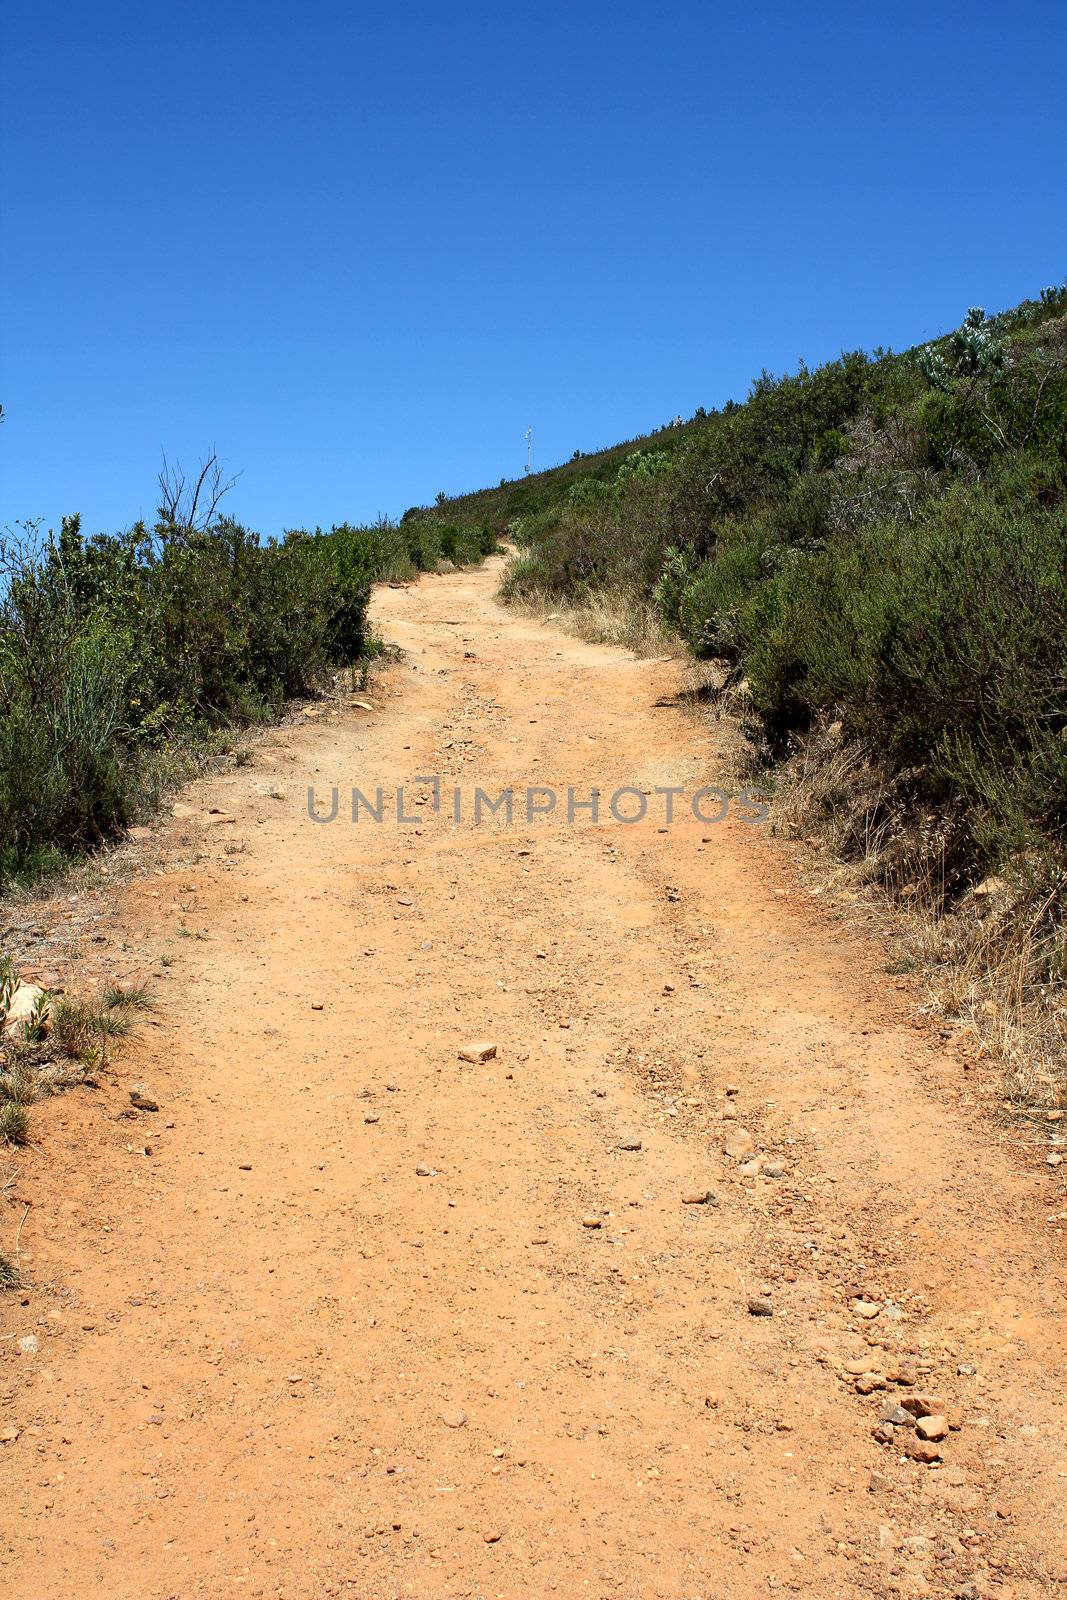 Hiking Path on table Mountain, South Africa by dwaschnig_photo